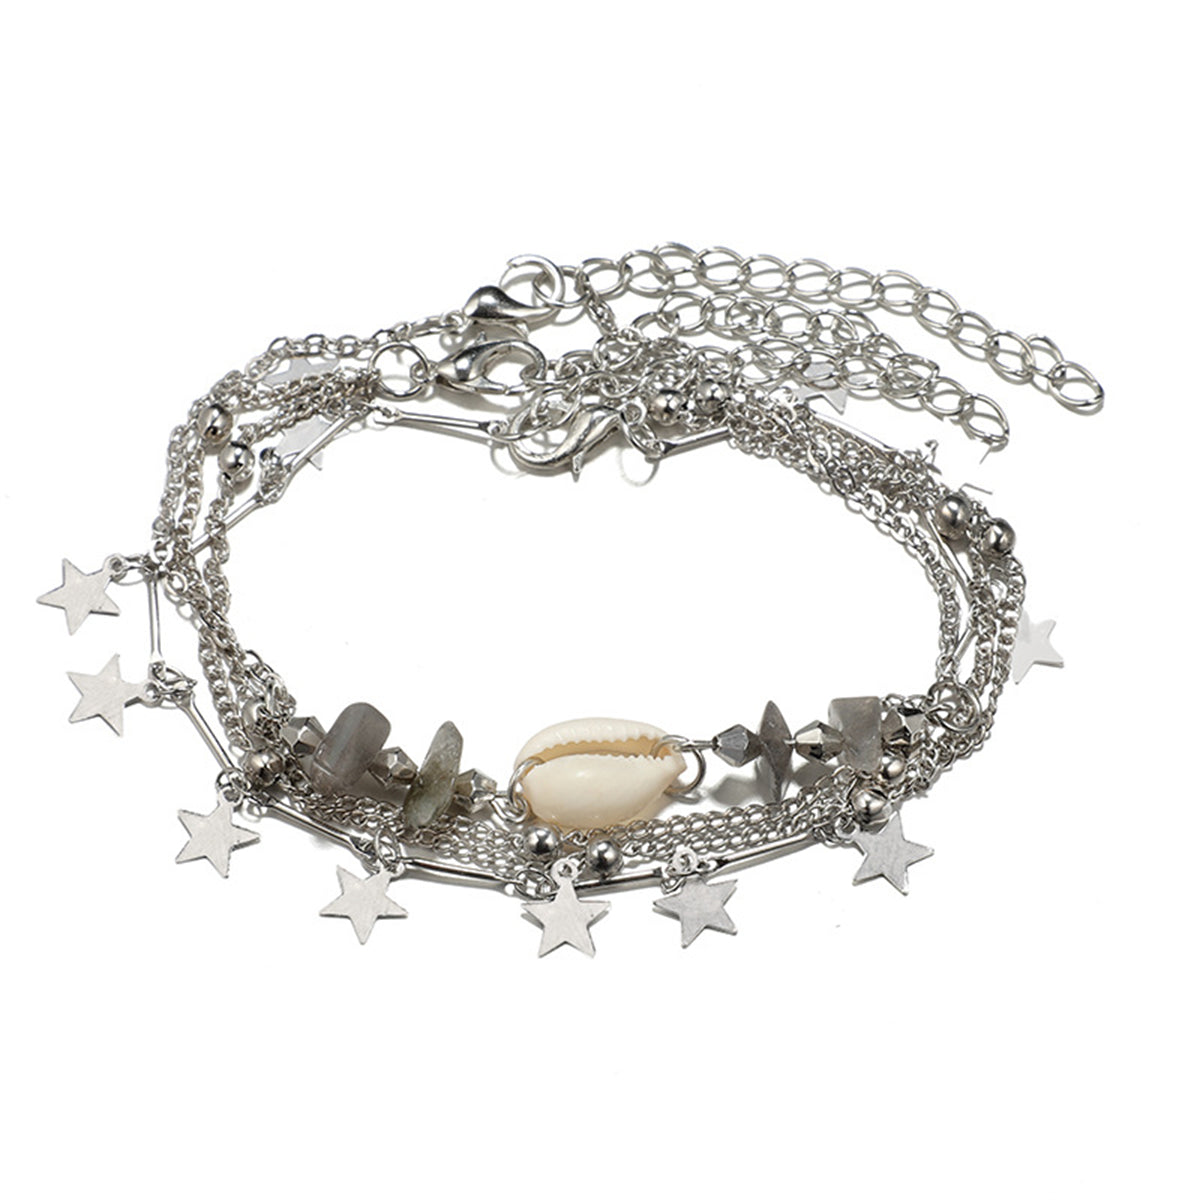 Seashell & Resin Silver-Plated Star Anklet Set